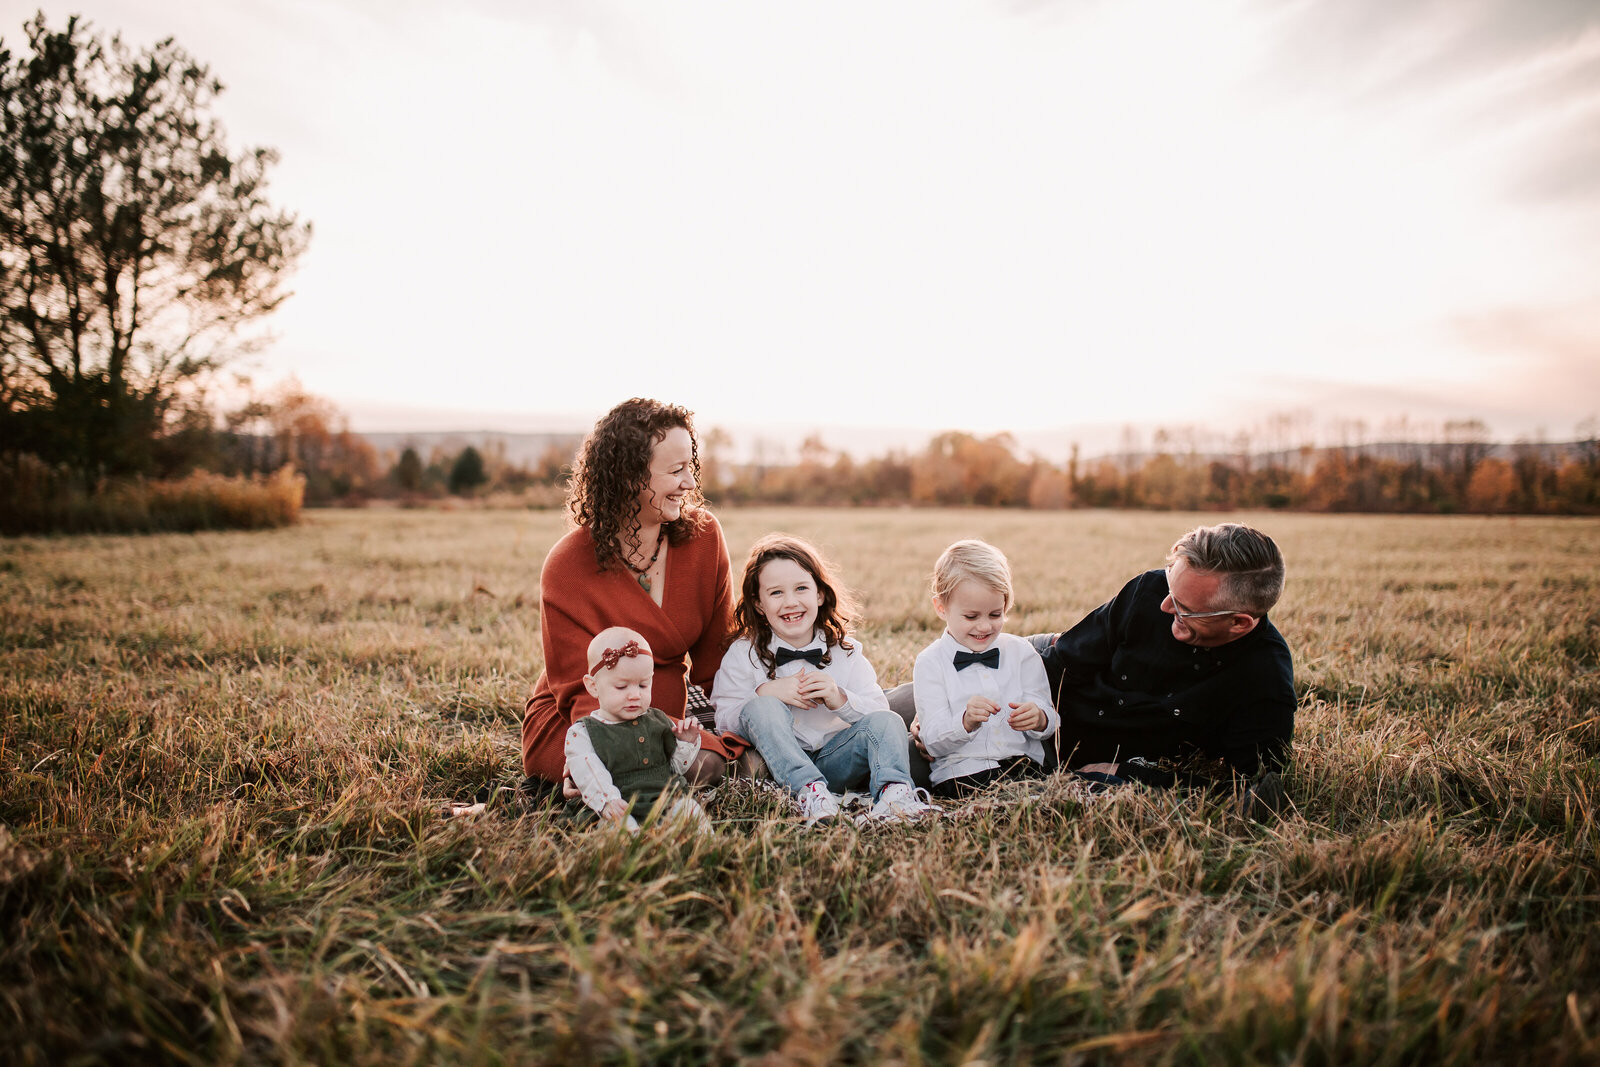 Family of five sitting in a grassy field at sunset laughing